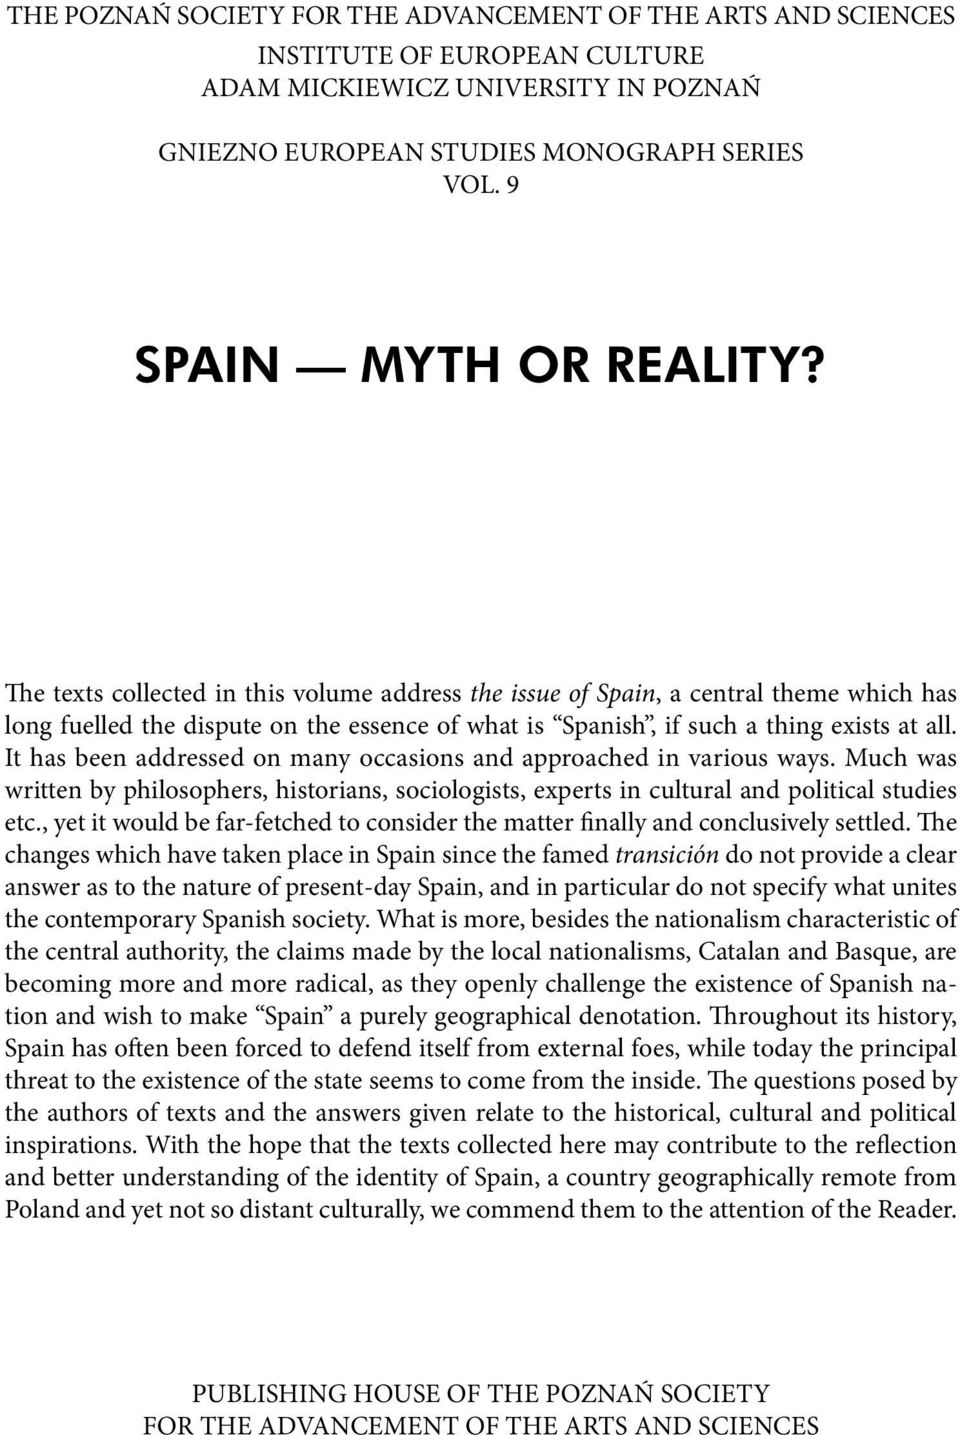 The texts collected in this volume address the issue of Spain, a central theme which has long fuelled the dispute on the essence of what is Spanish, if such a thing exists at all.